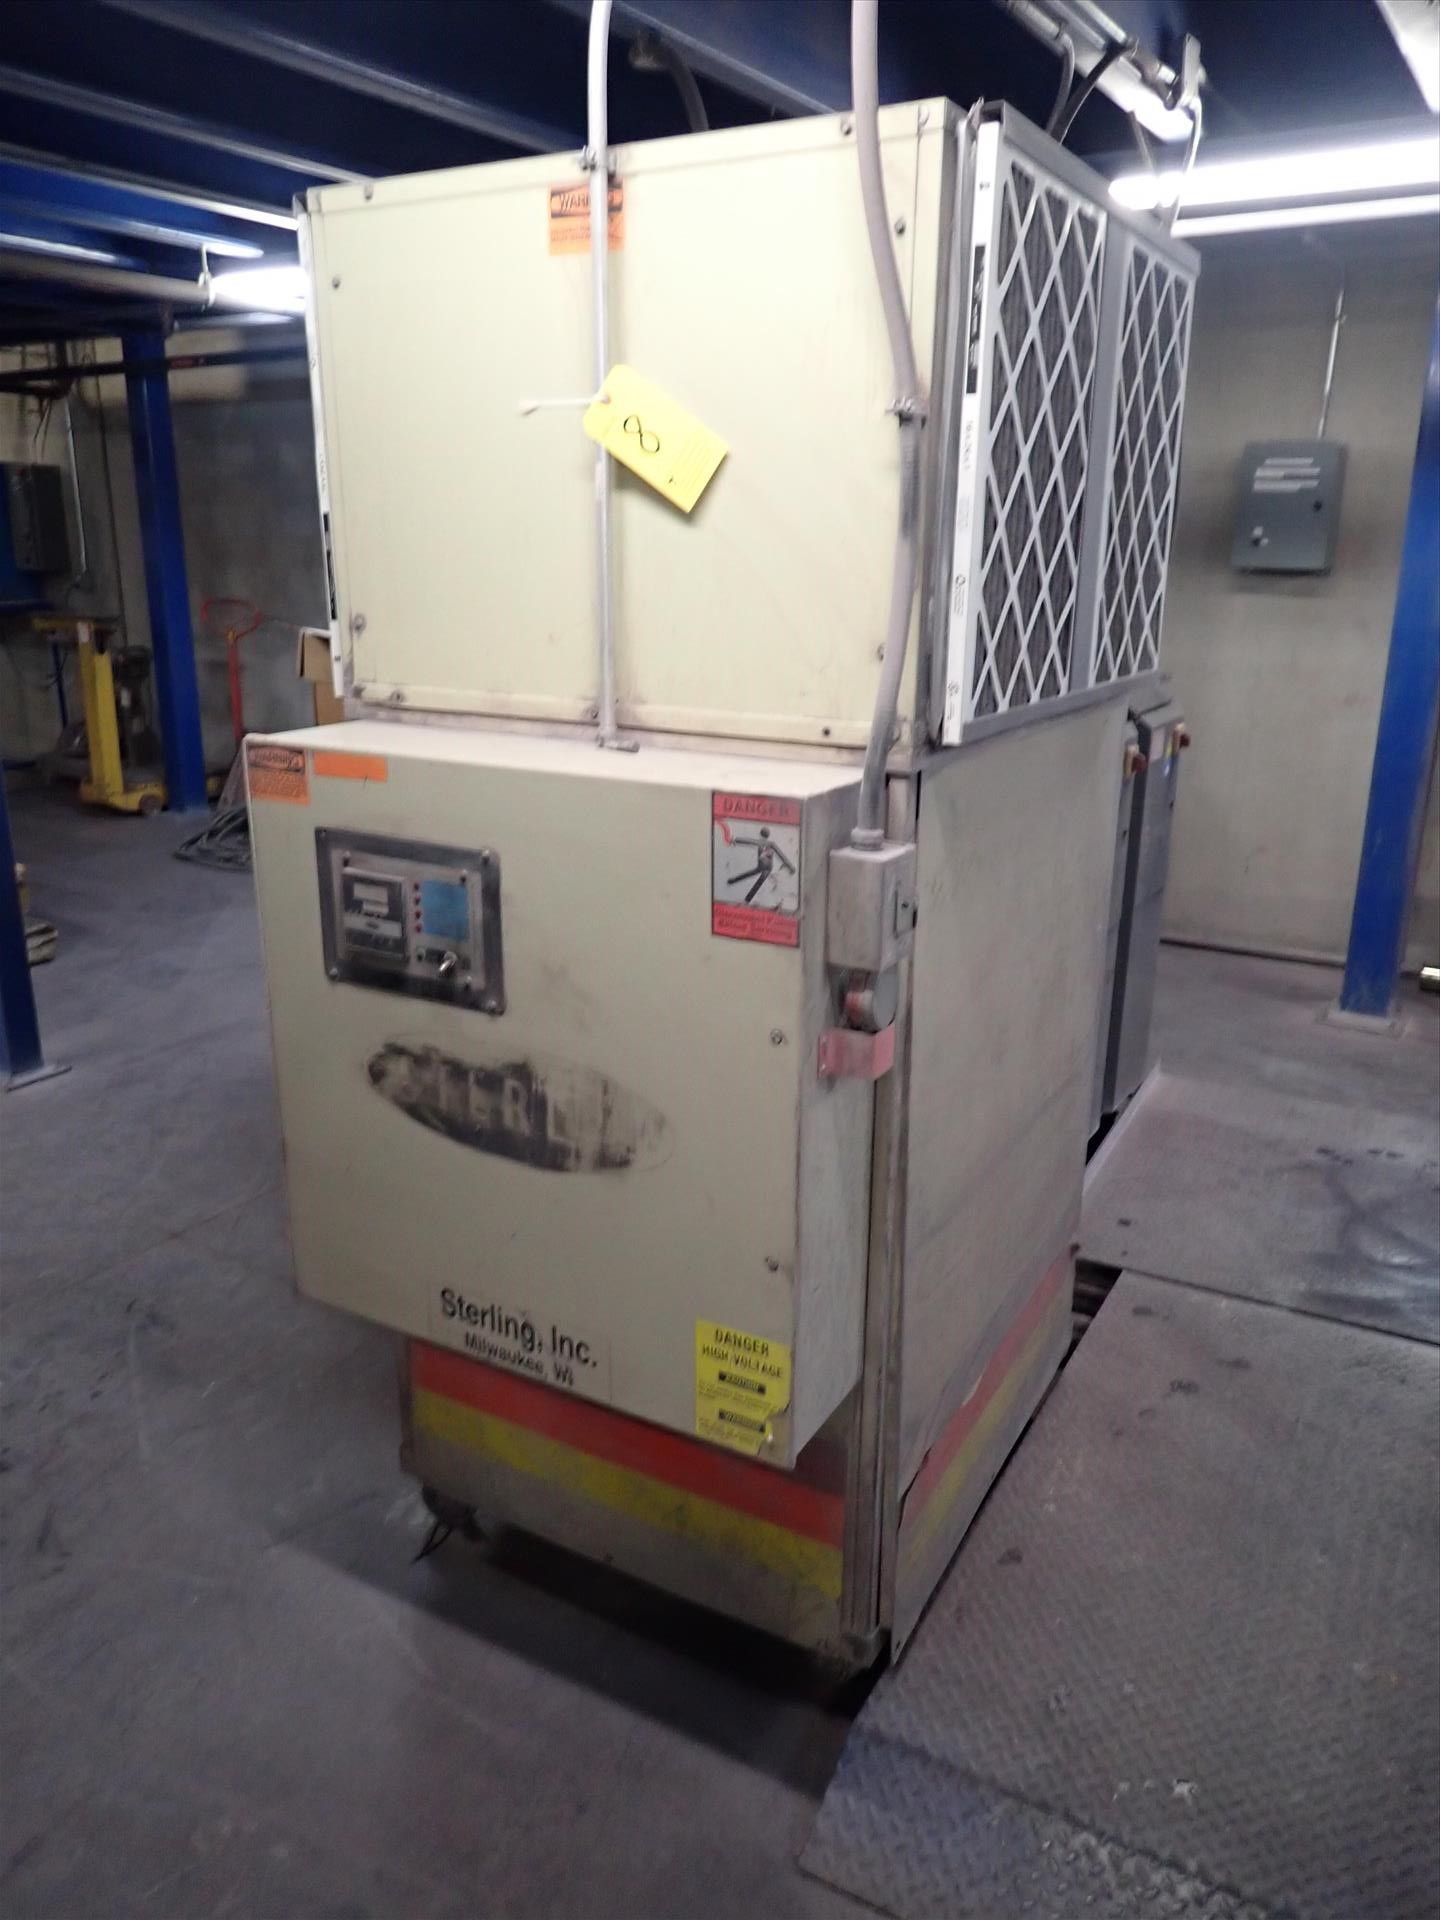 Sterling chiller mod. AFP05AQ ser. no. 97B5403, 30C - 65C, water/glycol, R22, 1-1-5 hp (Subject to